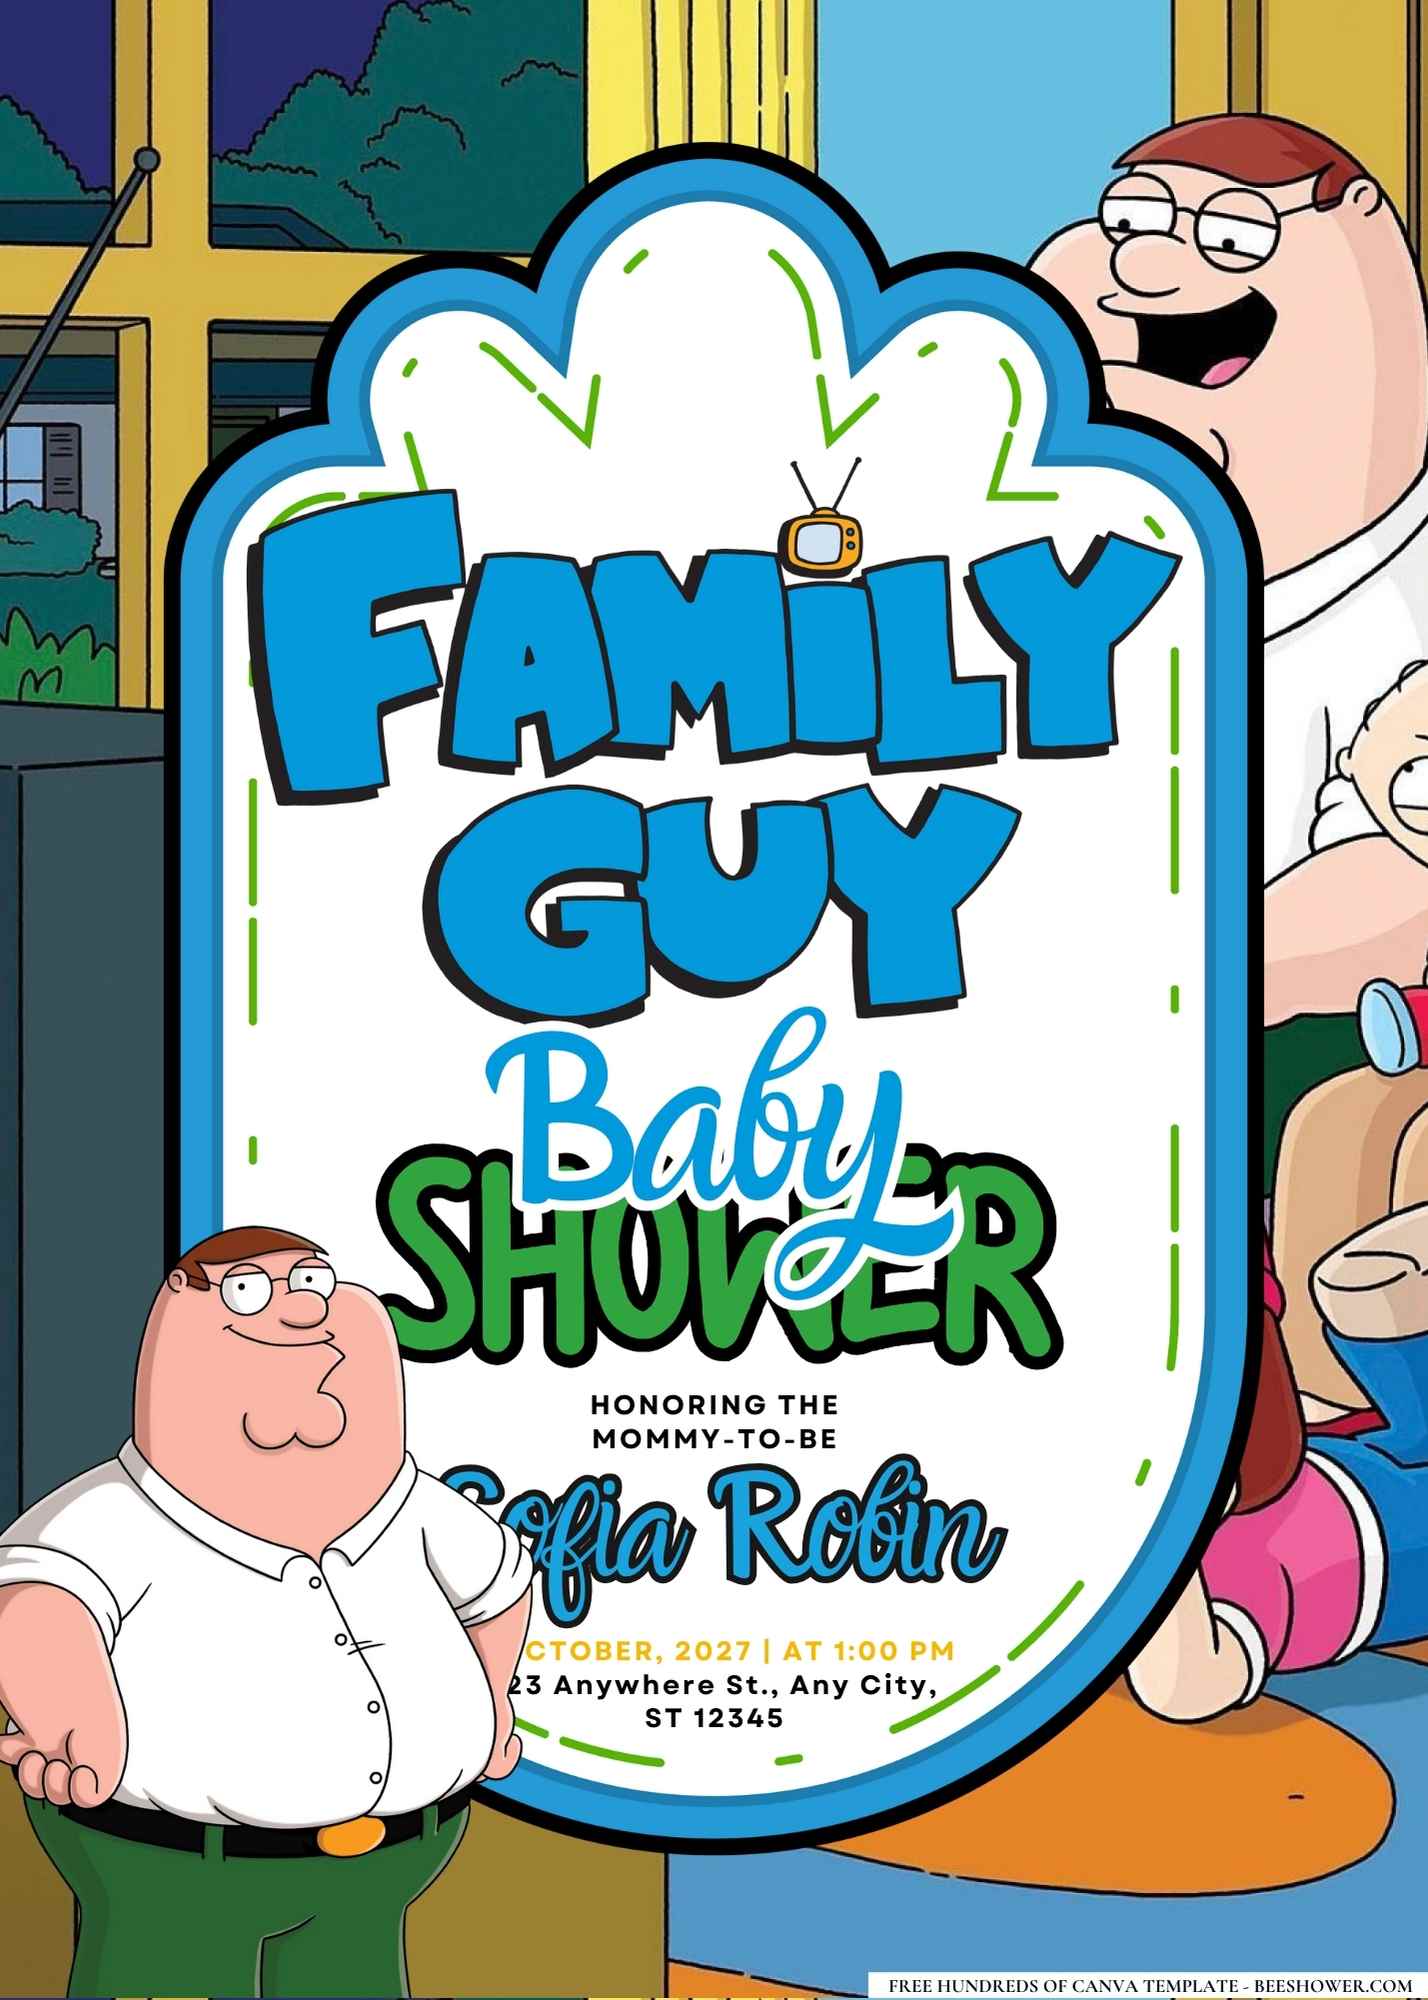 Peter Griffin (Family Guy) Baby Shower Invitation